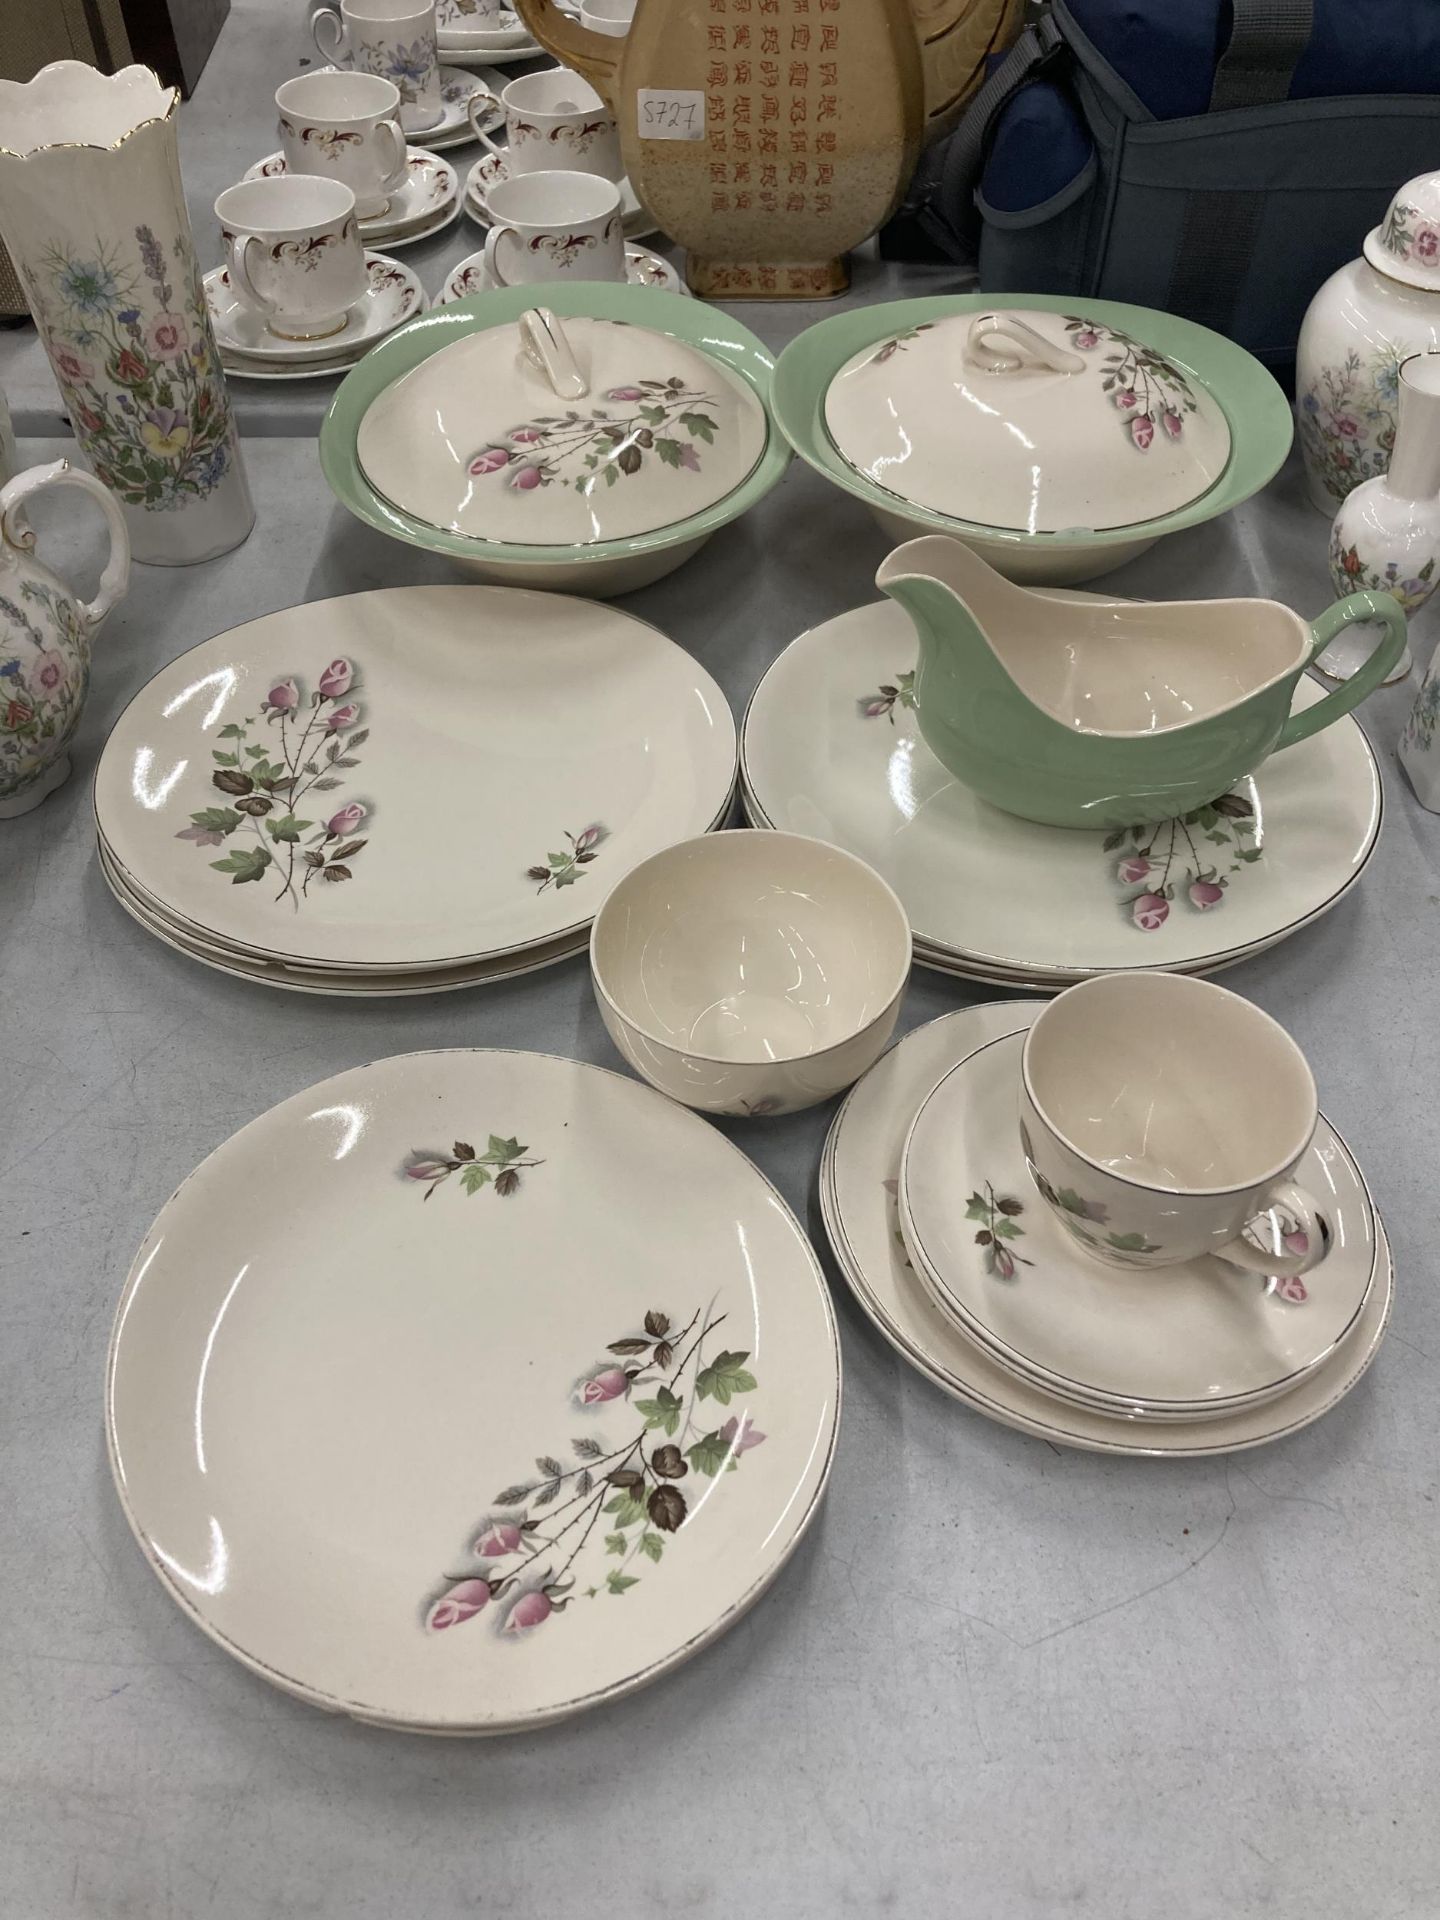 A QUANTITY OF VINTAGE JOHNSON BROS DINNER WARE TO INCLUDE SERVING TUREENS, PLATES, A SAUCE BOAT